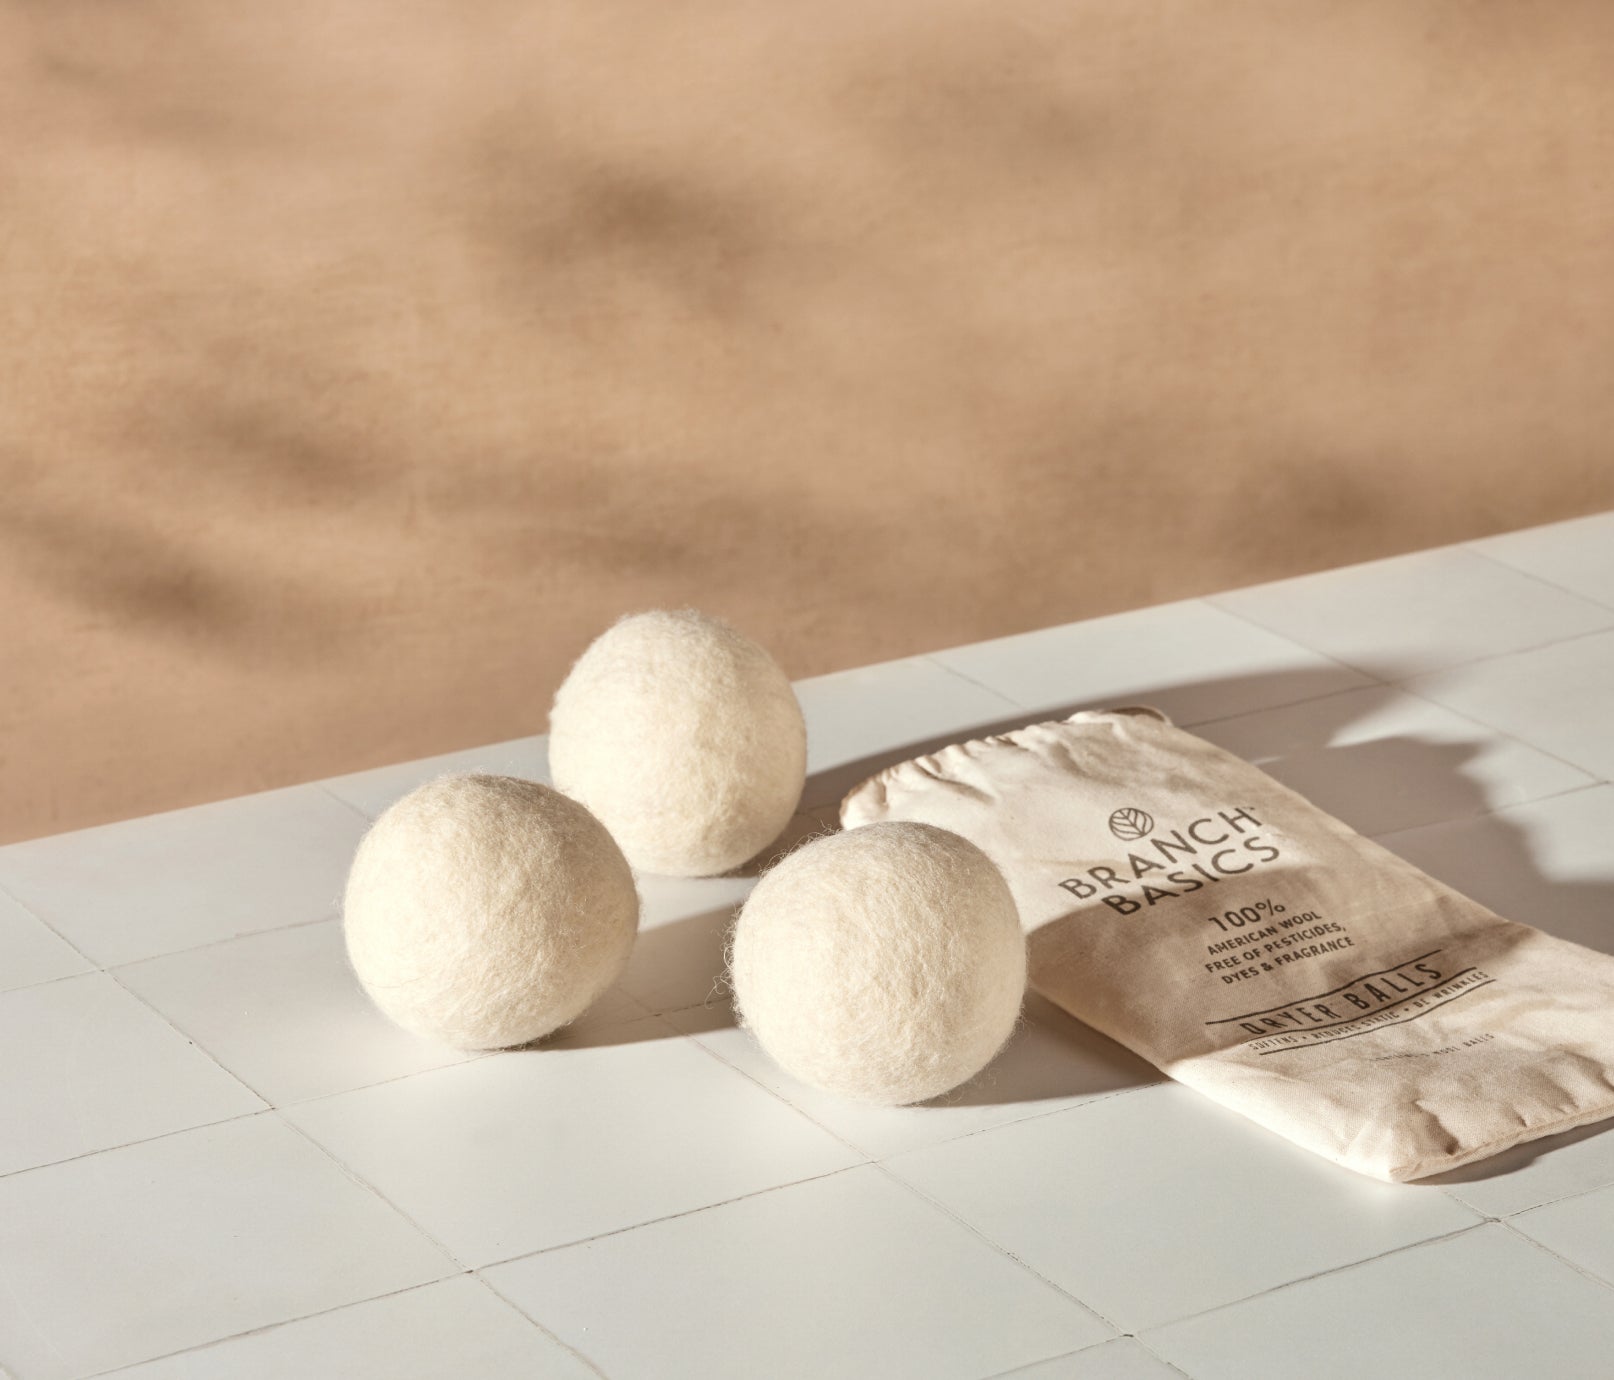 Wool Dryer Balls: All-Natural Laundry Products